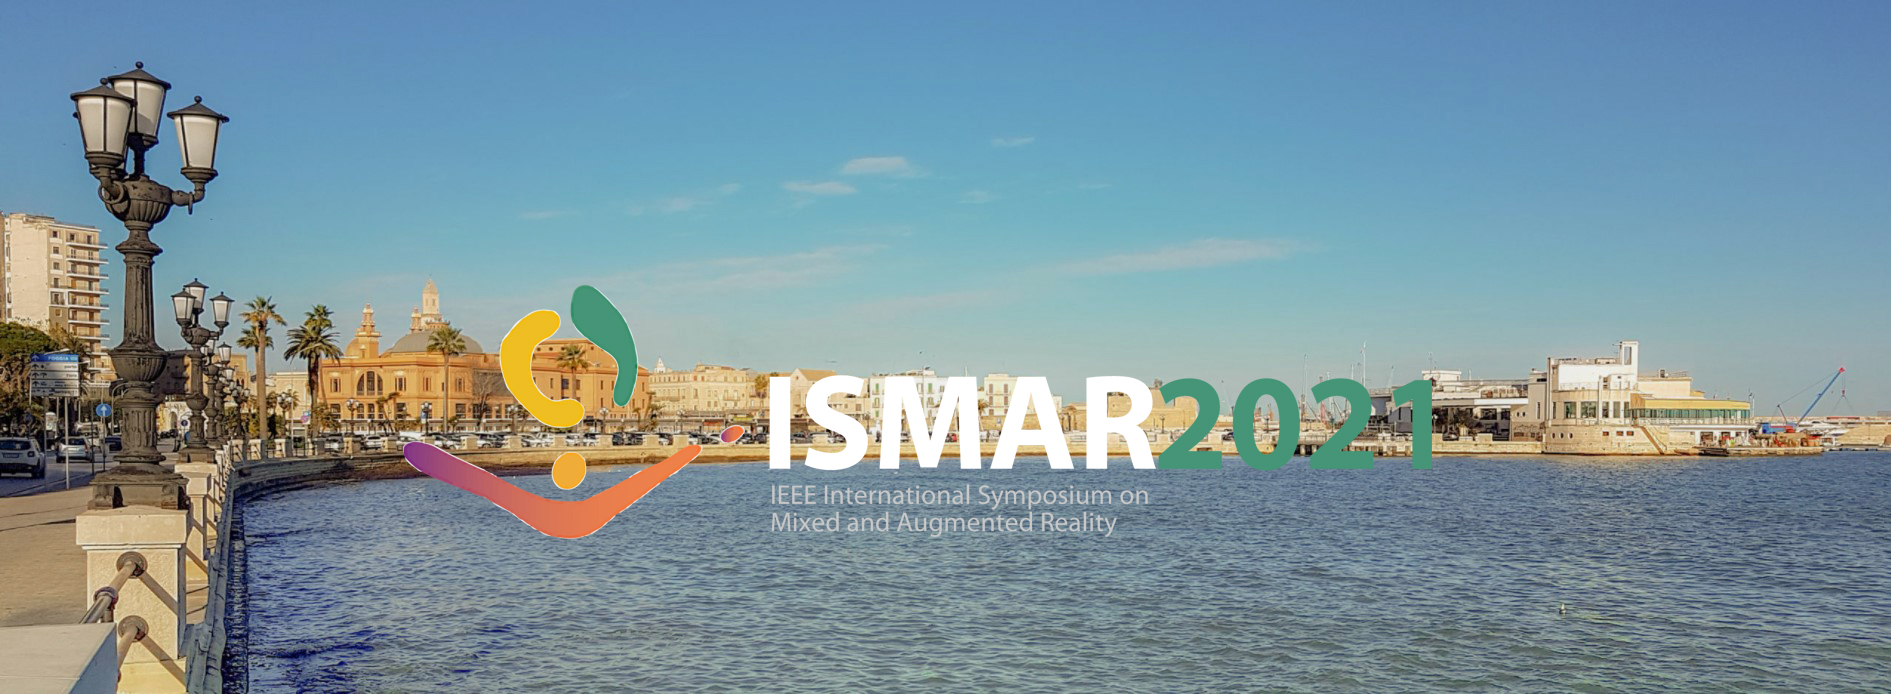 2021: International Symposium on and Augmented Reality EuroXR